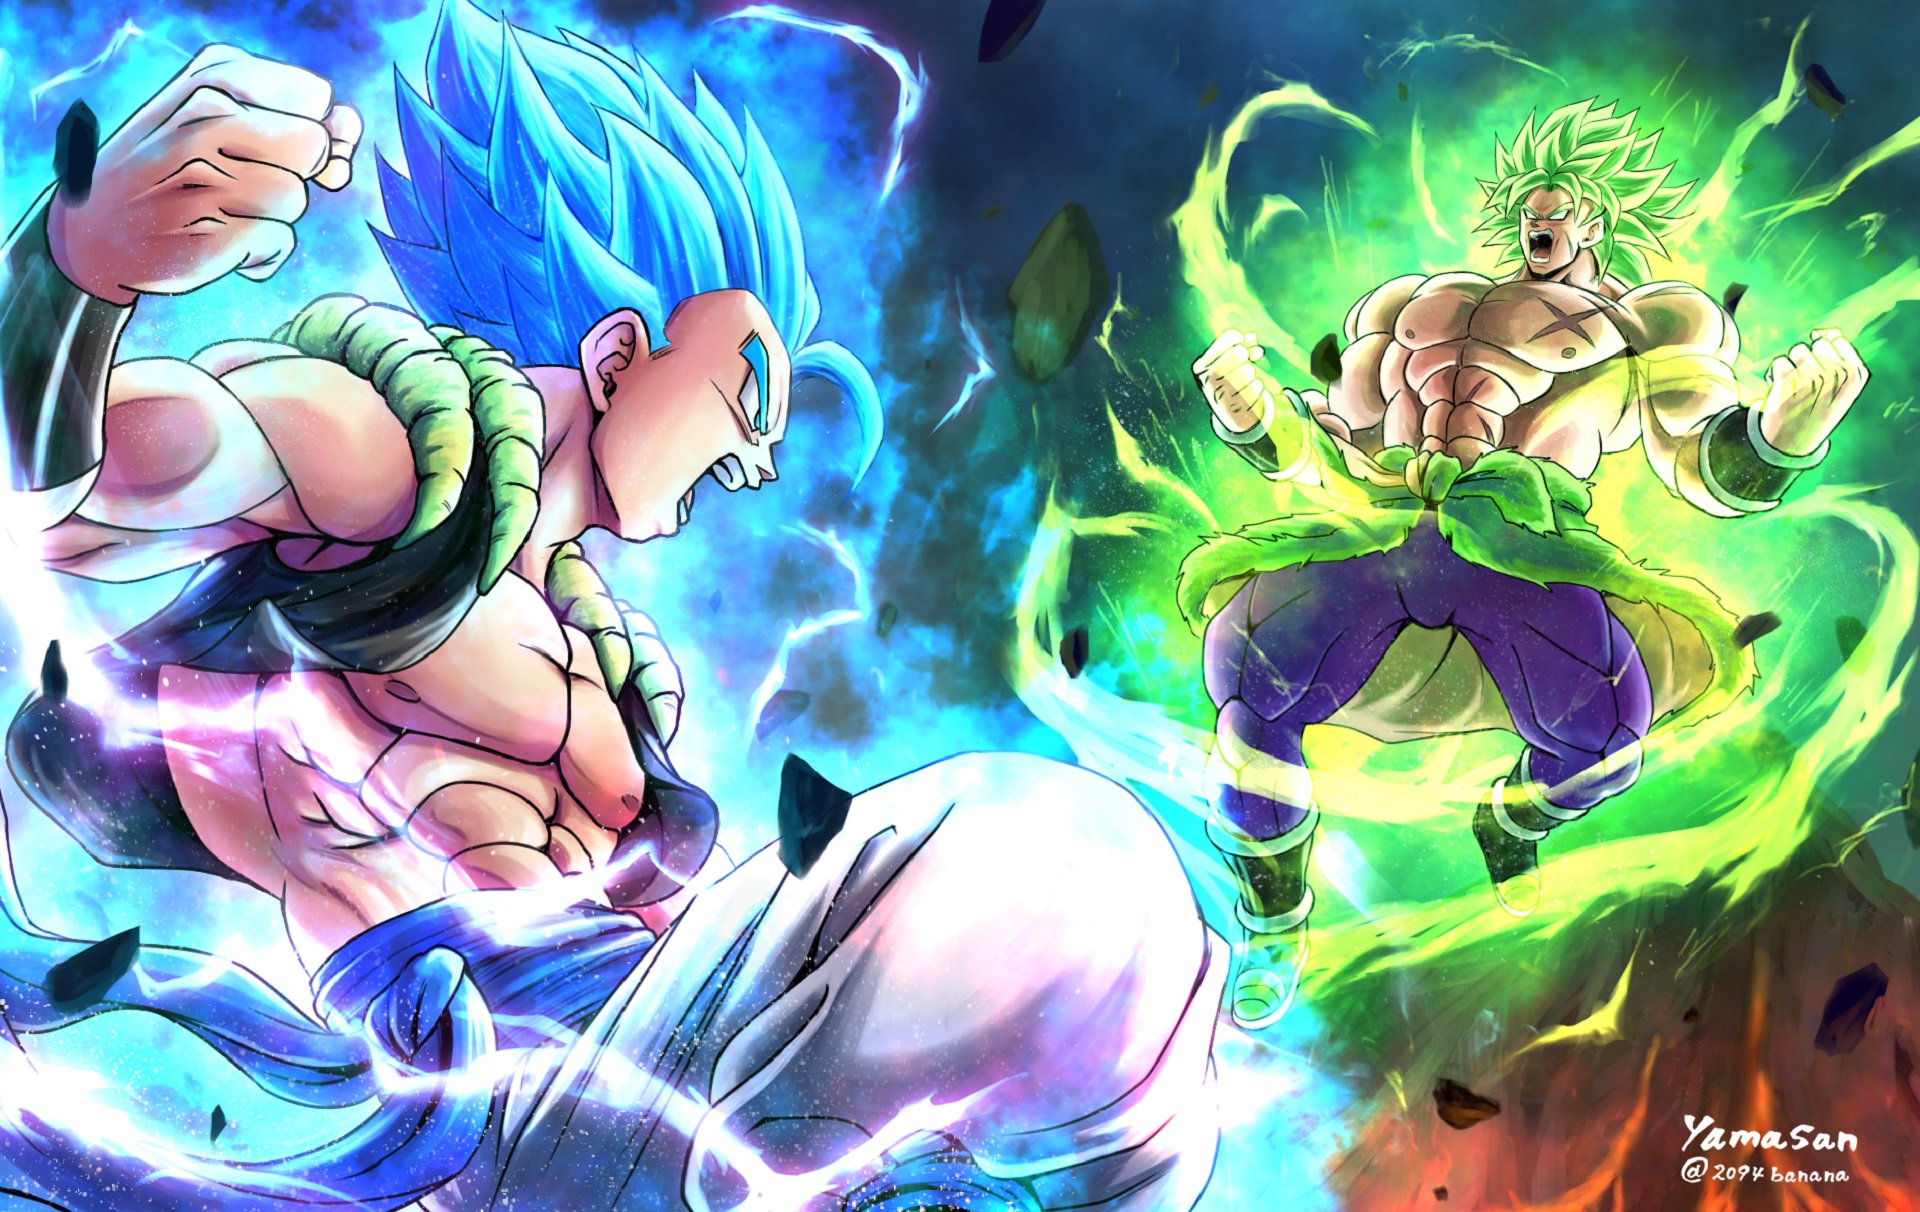 Dragon Ball Super Broly Hd Wallpapers Pictures Images